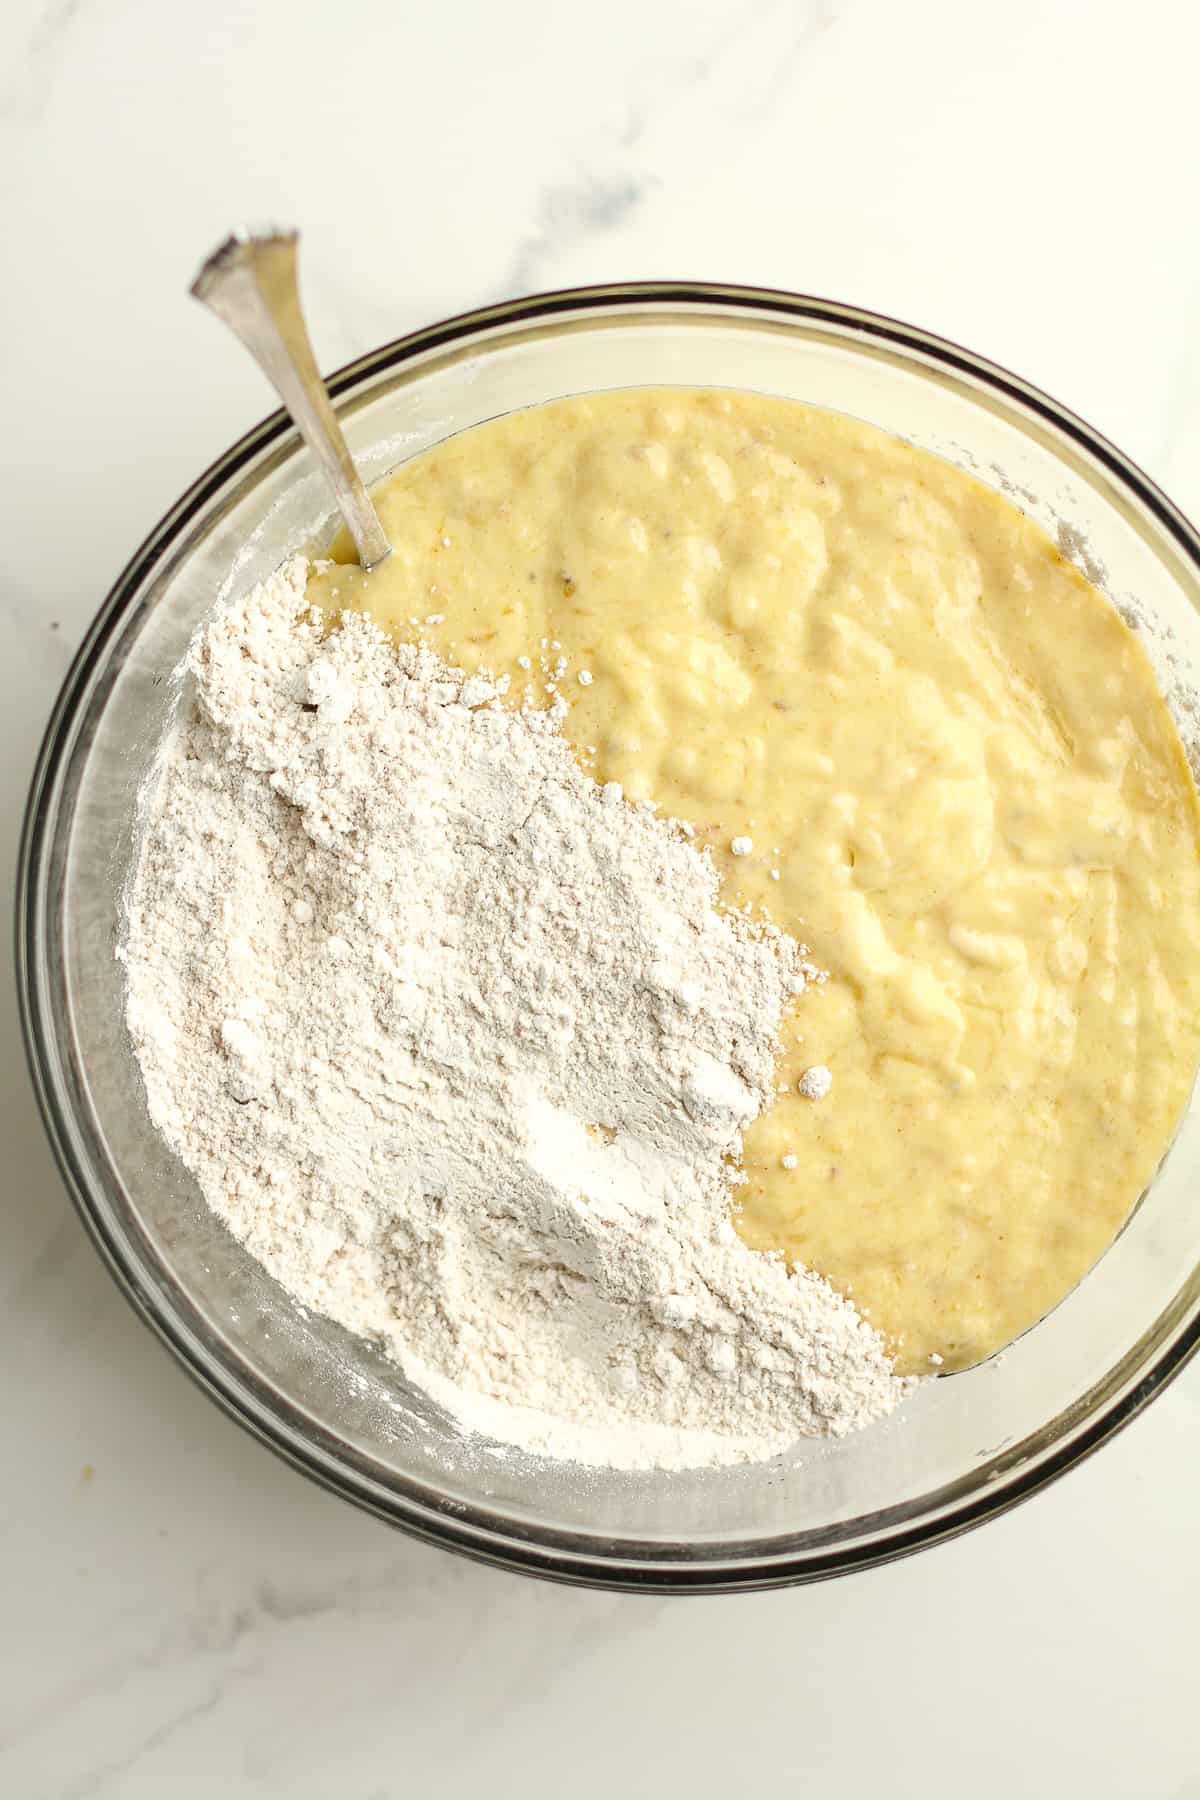 A bowl of the banana cake batter with the flour on top.